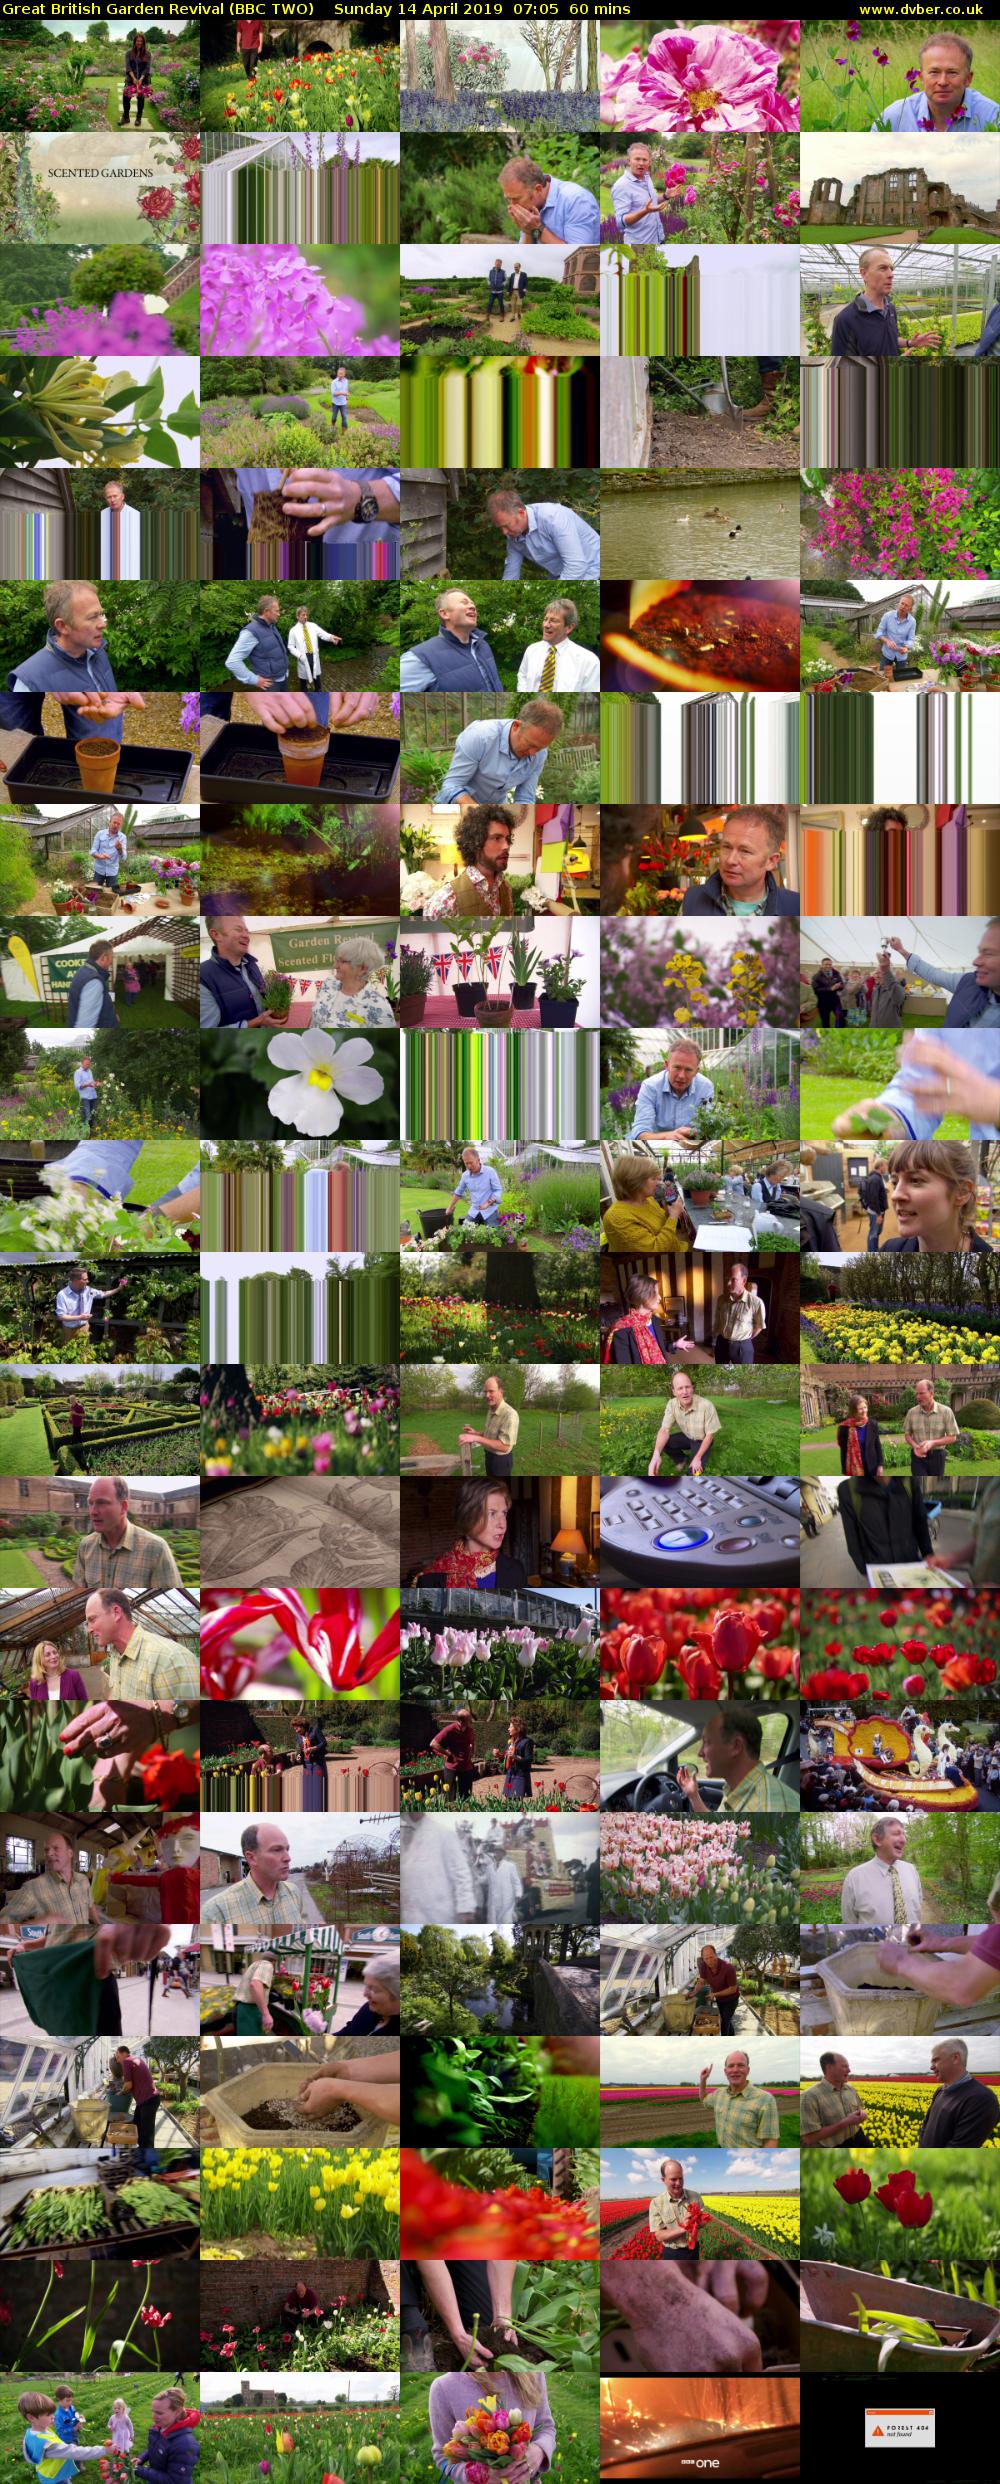 Great British Garden Revival (BBC TWO) Sunday 14 April 2019 07:05 - 08:05